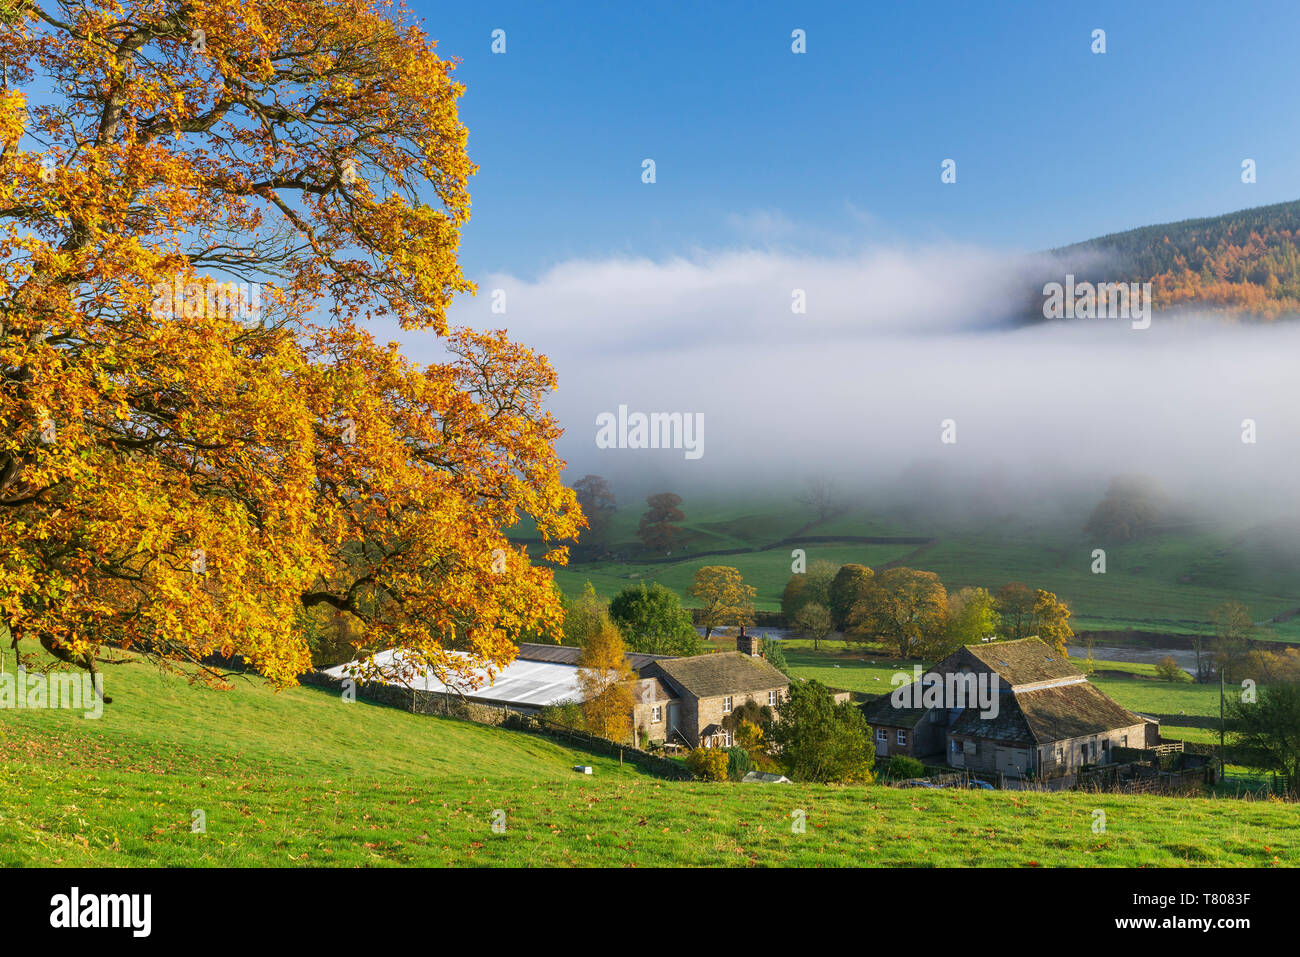 Mist around Simons Seat and along the River Wharfe in Wharfedale, The Yorkshire Dales, Yorkshire, England, United Kingdom, Europe Stock Photo